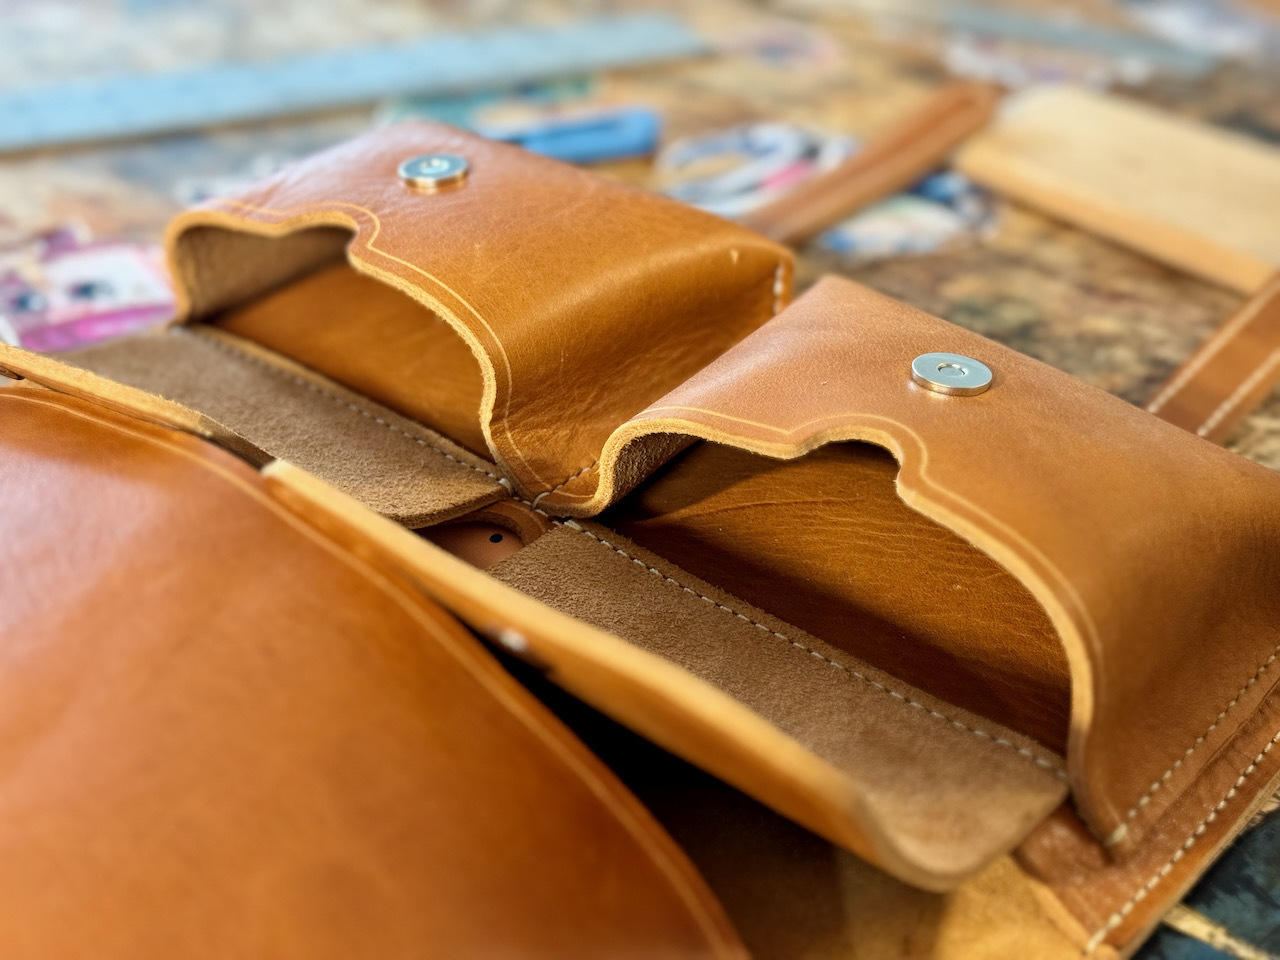 Two accessory pockets shown open on a leather cigar case